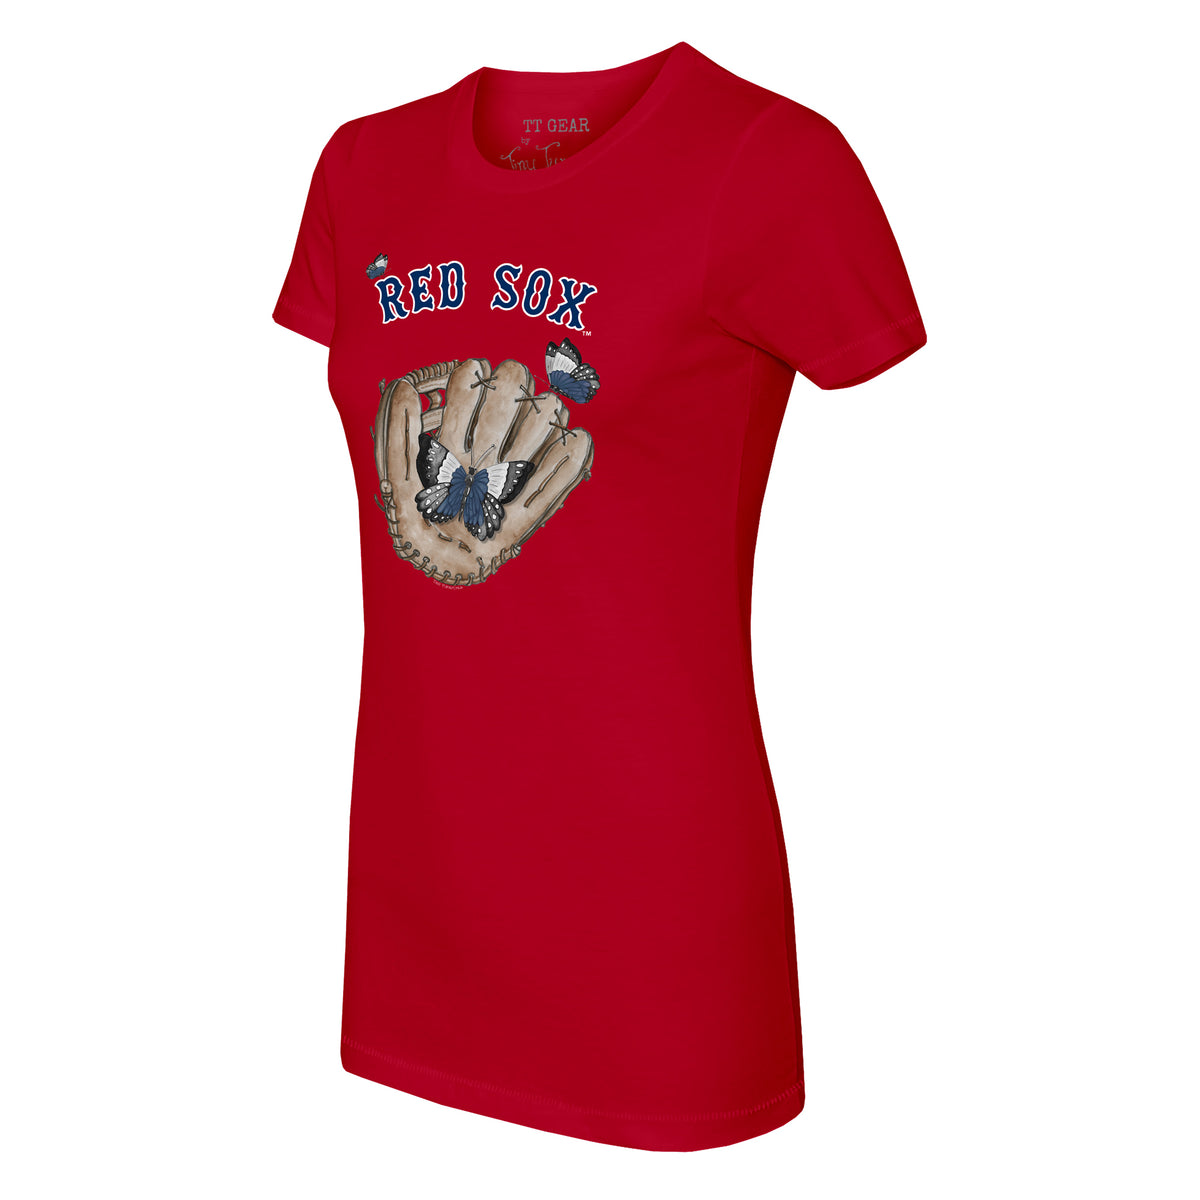 Boston Red Sox Butterfly Glove Tee Shirt